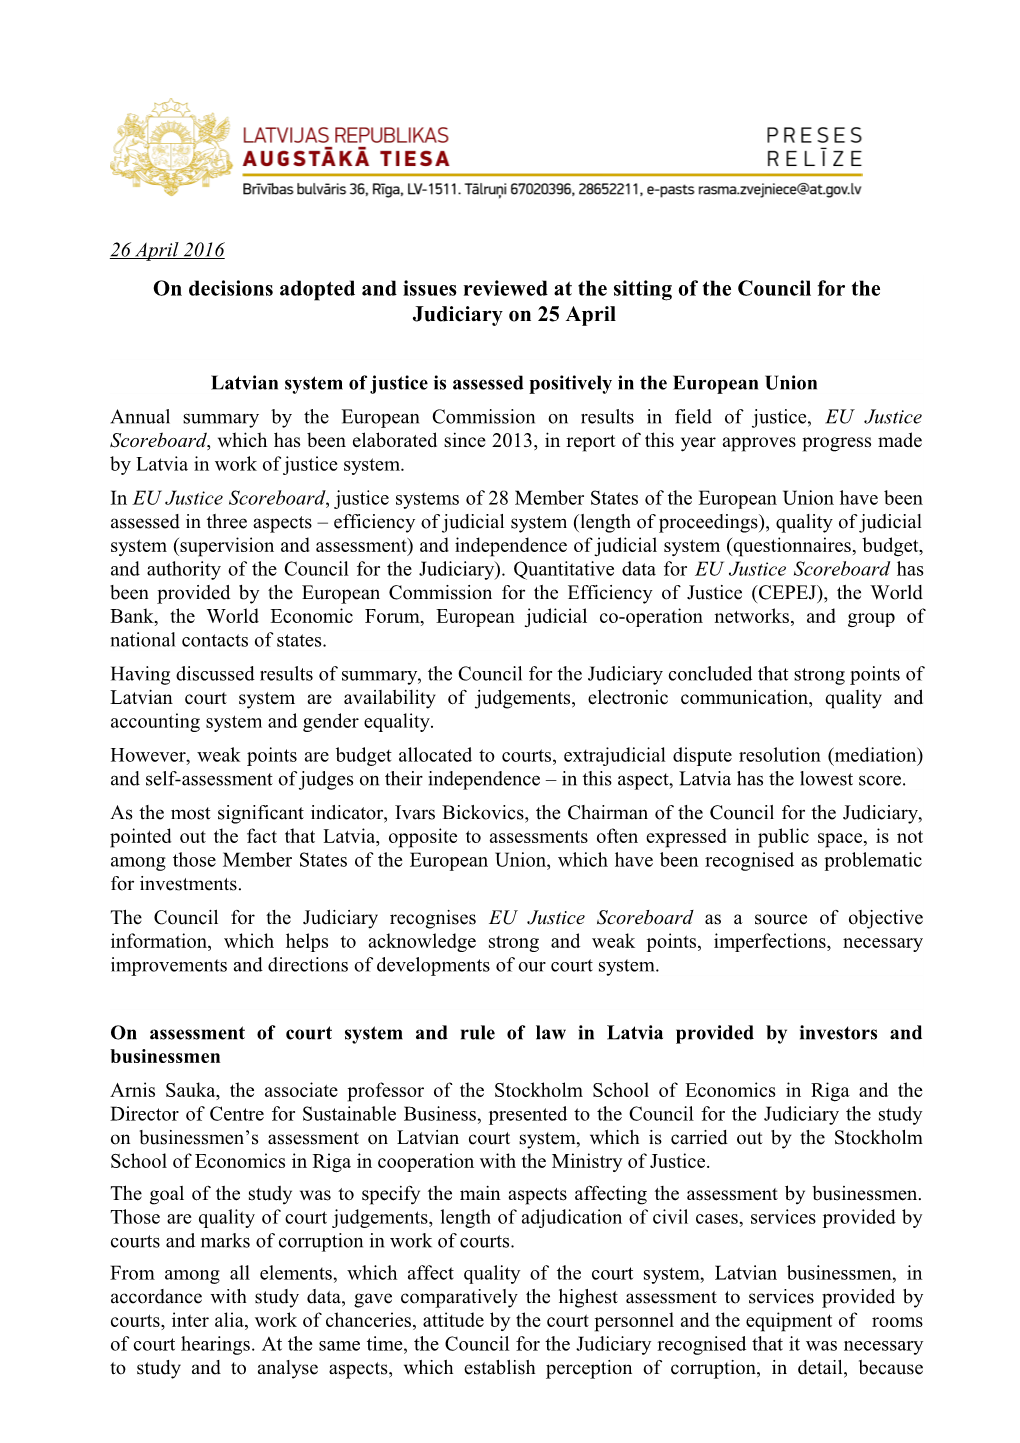 Latvian System of Justice Is Assessed Positively in the European Union